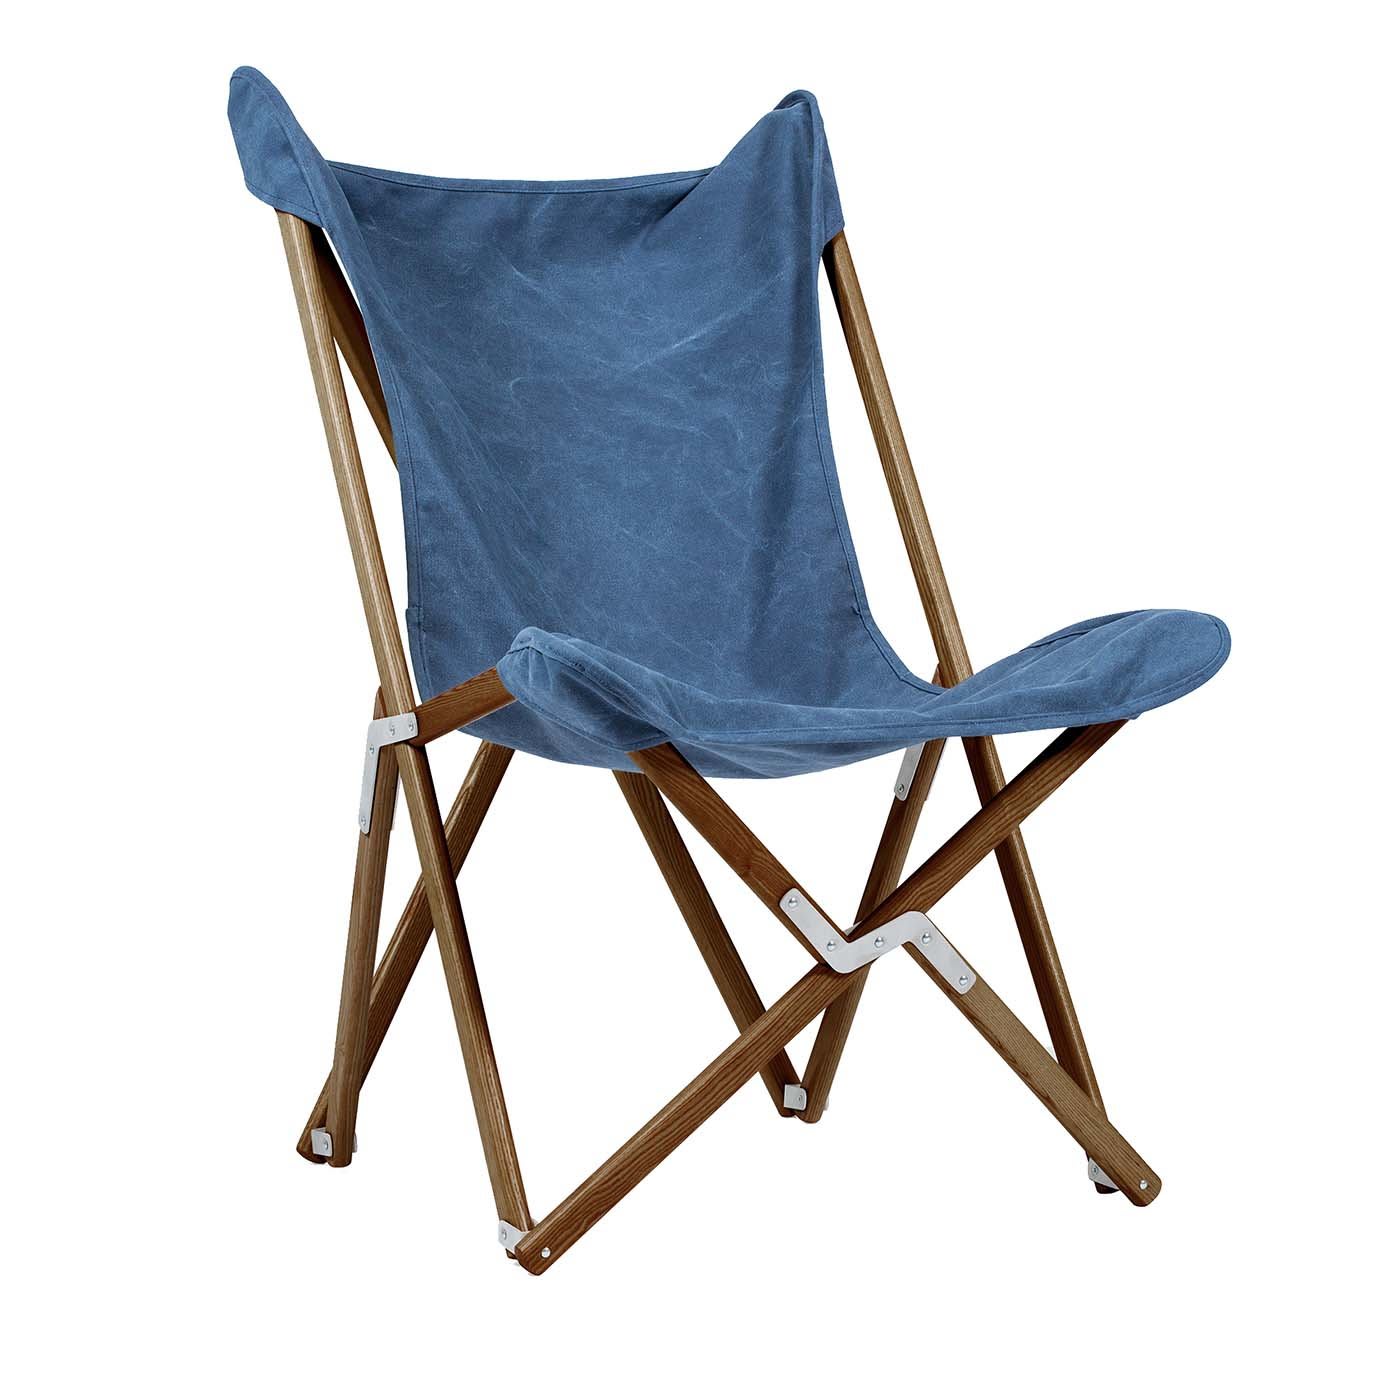 Tripolina Armchair in Blue Jeans - Telami